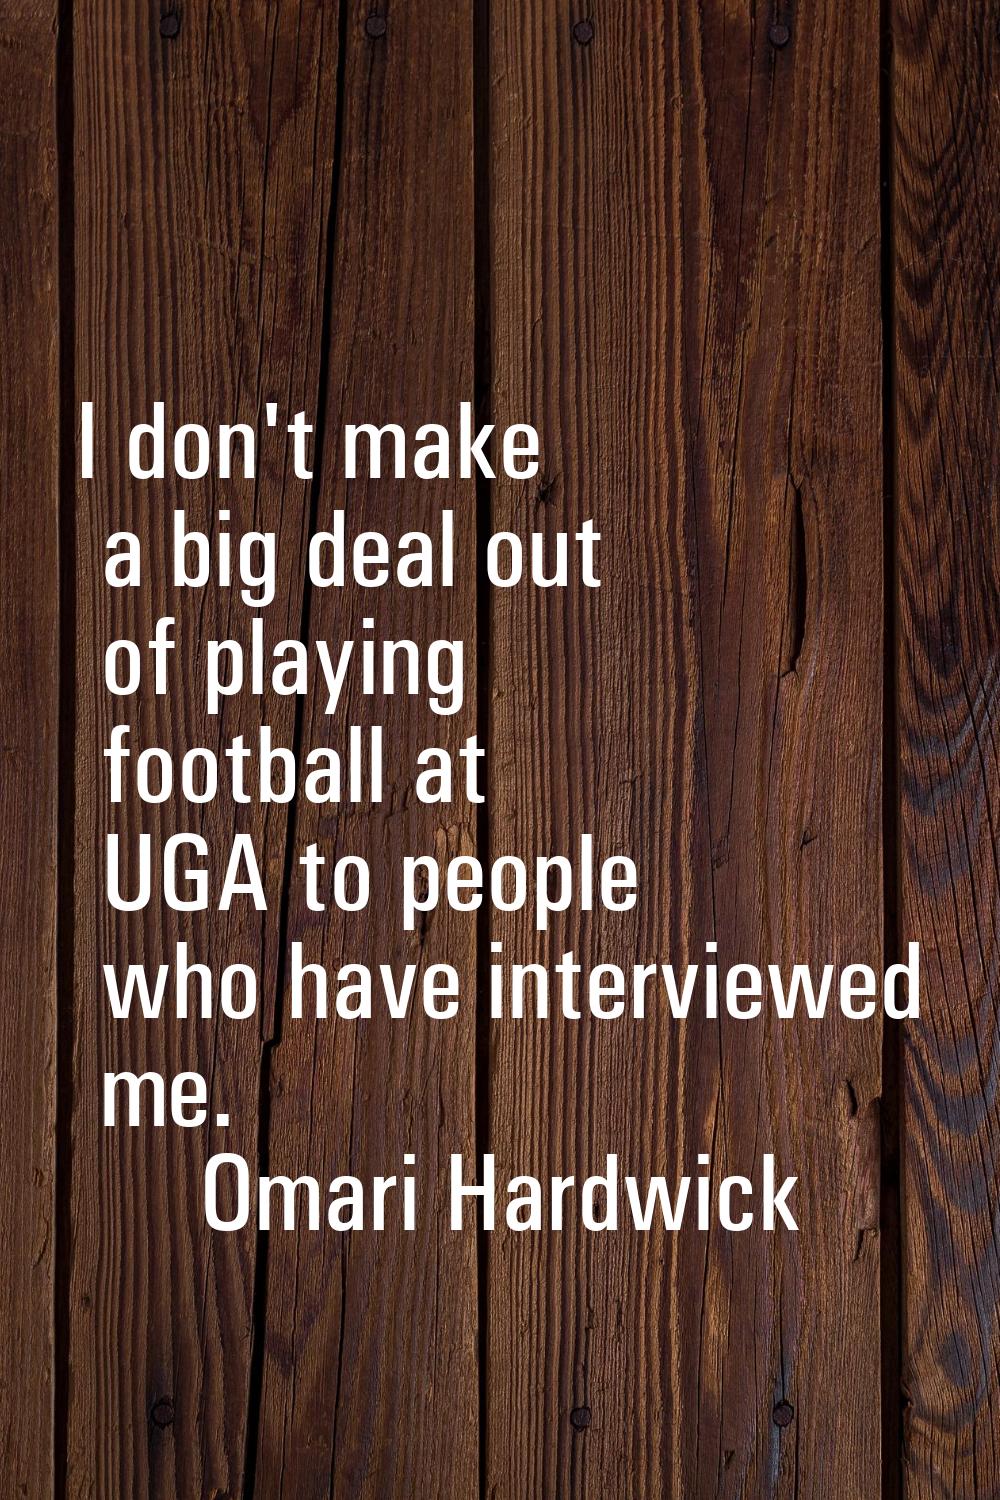 I don't make a big deal out of playing football at UGA to people who have interviewed me.